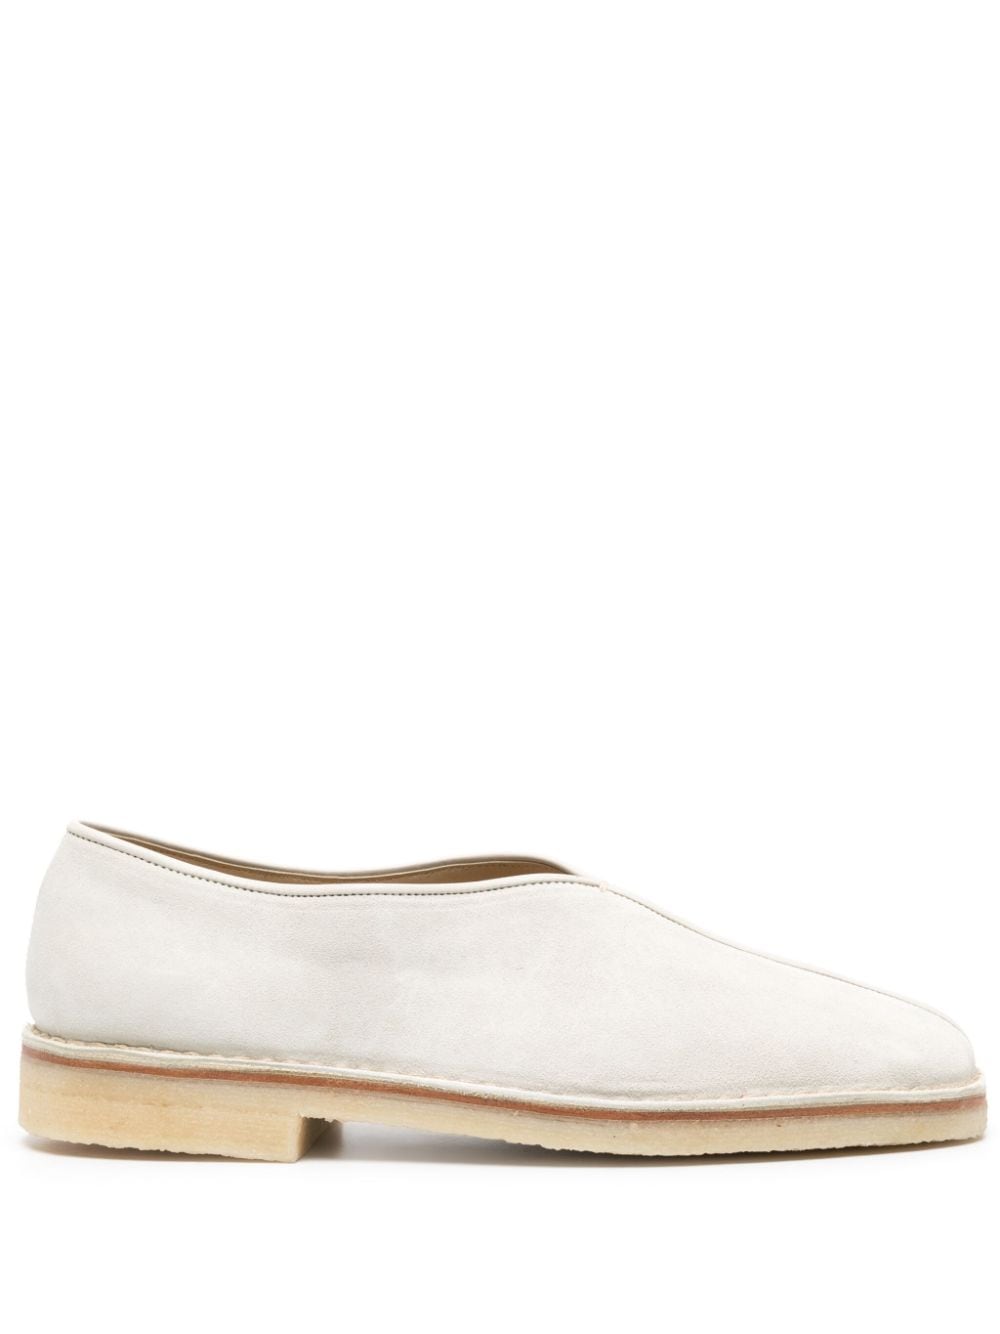 LEMAIRE square-toe suede loafers - Grey von LEMAIRE